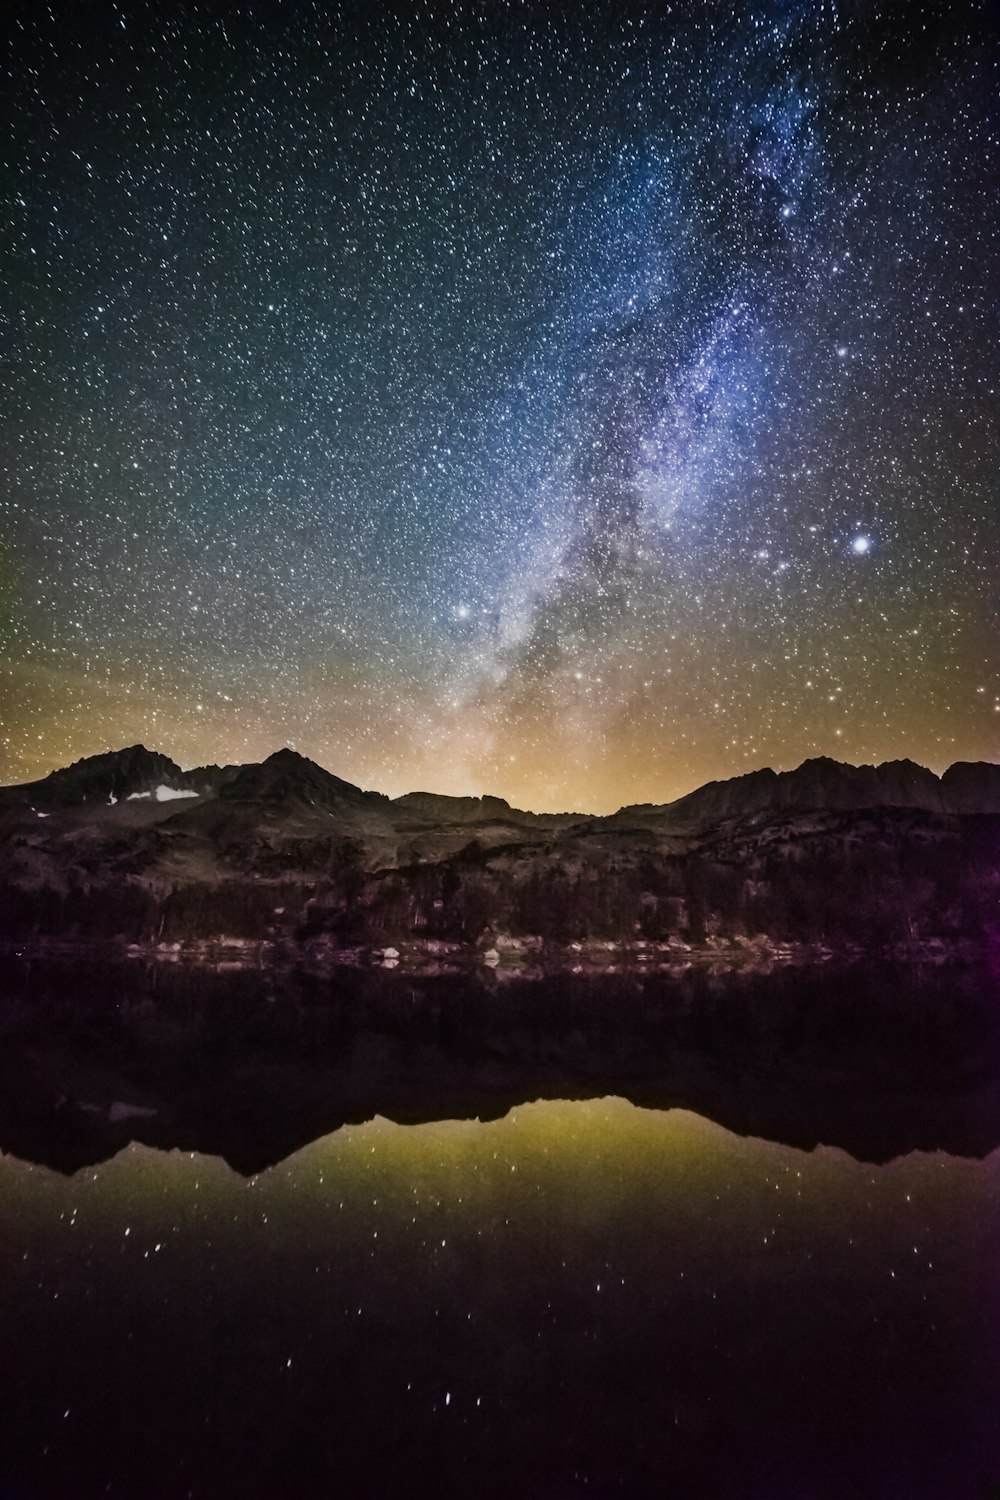 starry night sky over the mountain by the glassy lake